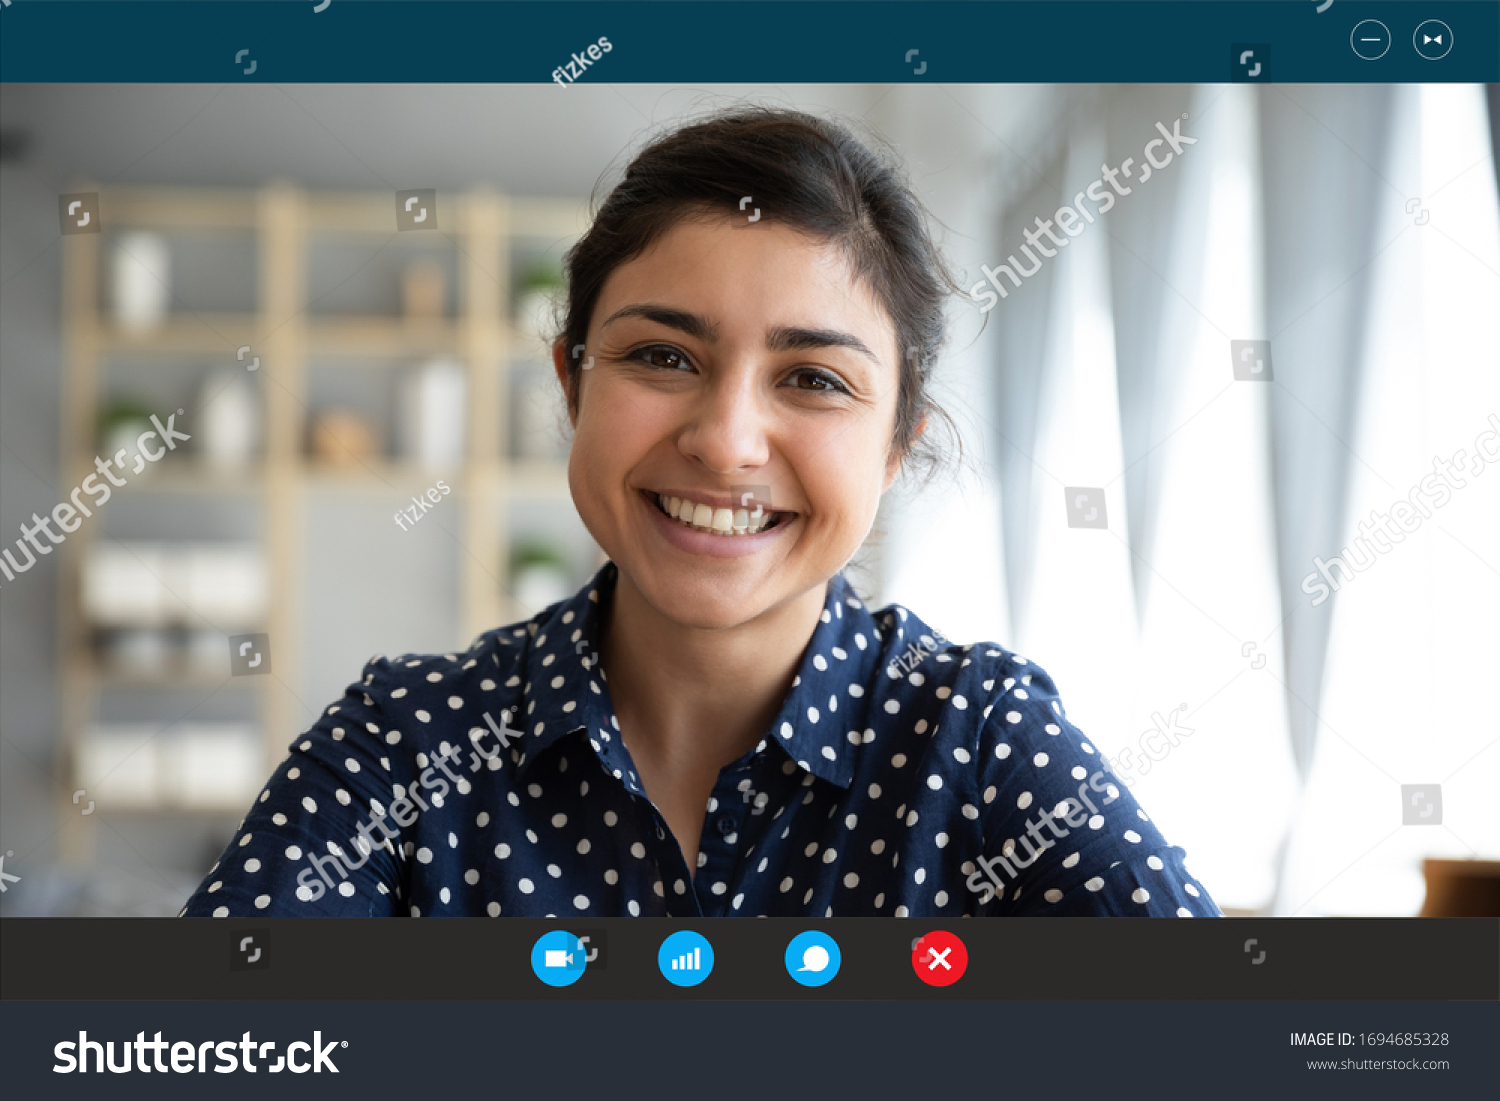 Laptop web cam view head shot of indian woman. E-date online services, video call using phone or pc, distance chat with mates common task, conversation between friends, job interview remotely concept #1694685328